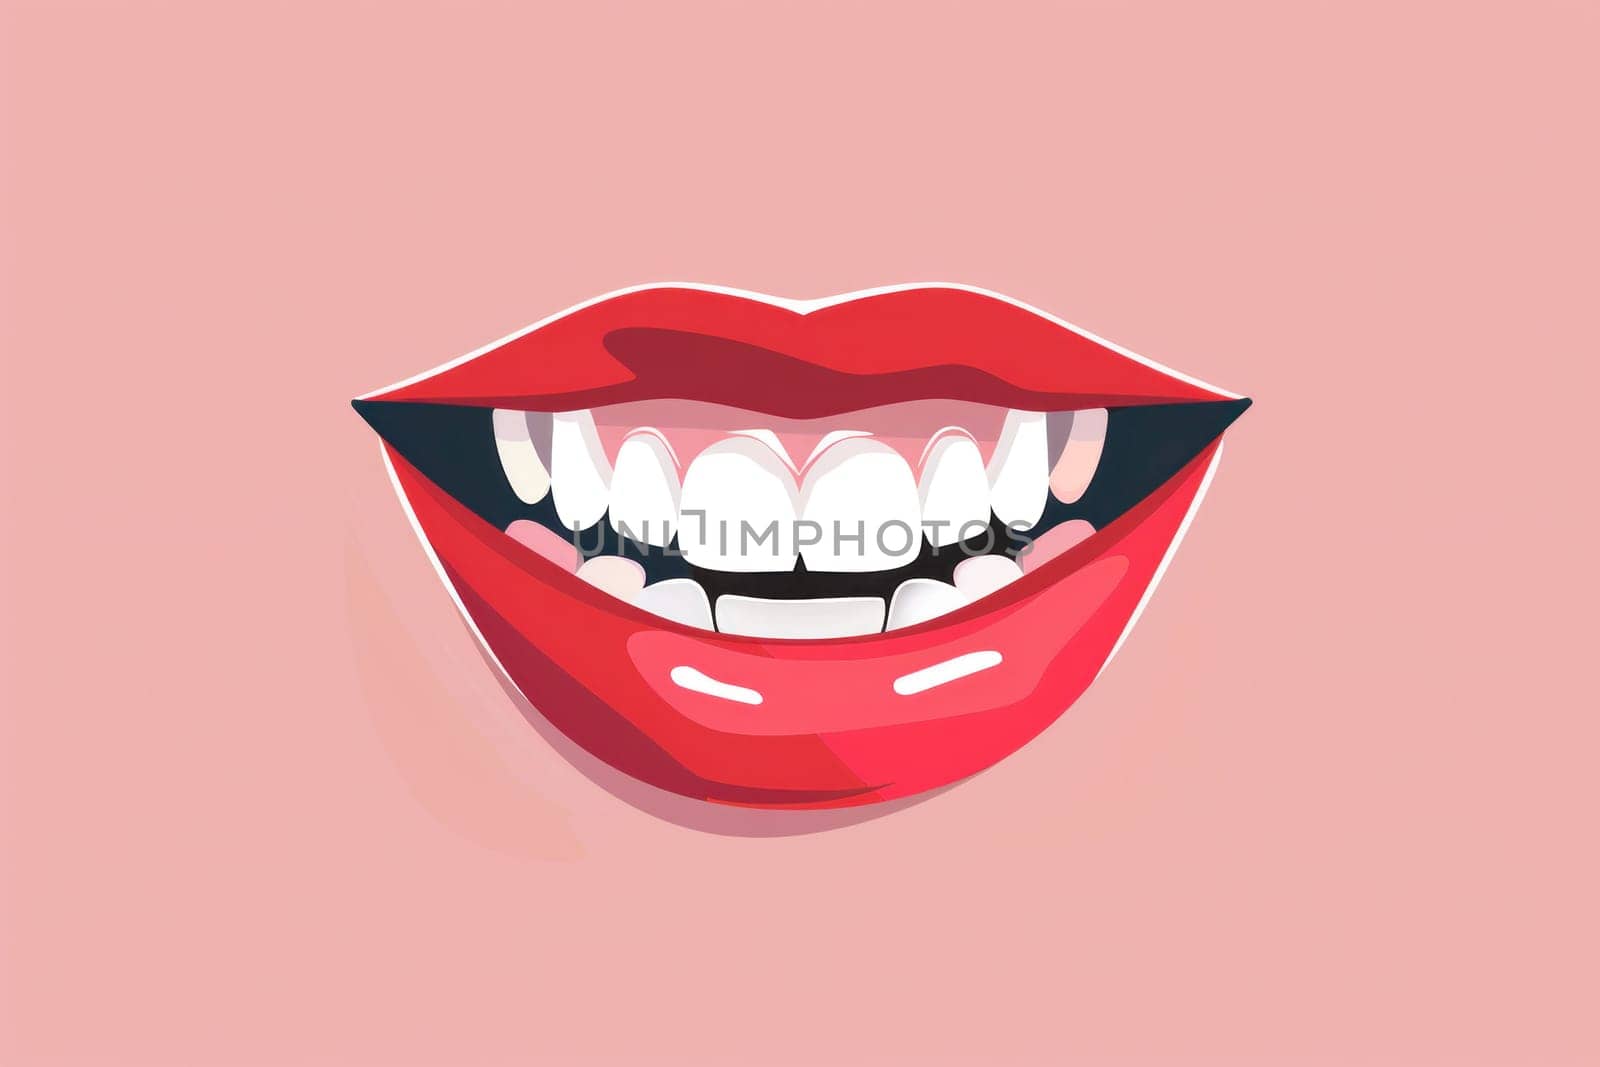 Fashionable woman's mouth with perfect white teeth and red lips on pink background illustration for beauty and dental concepts